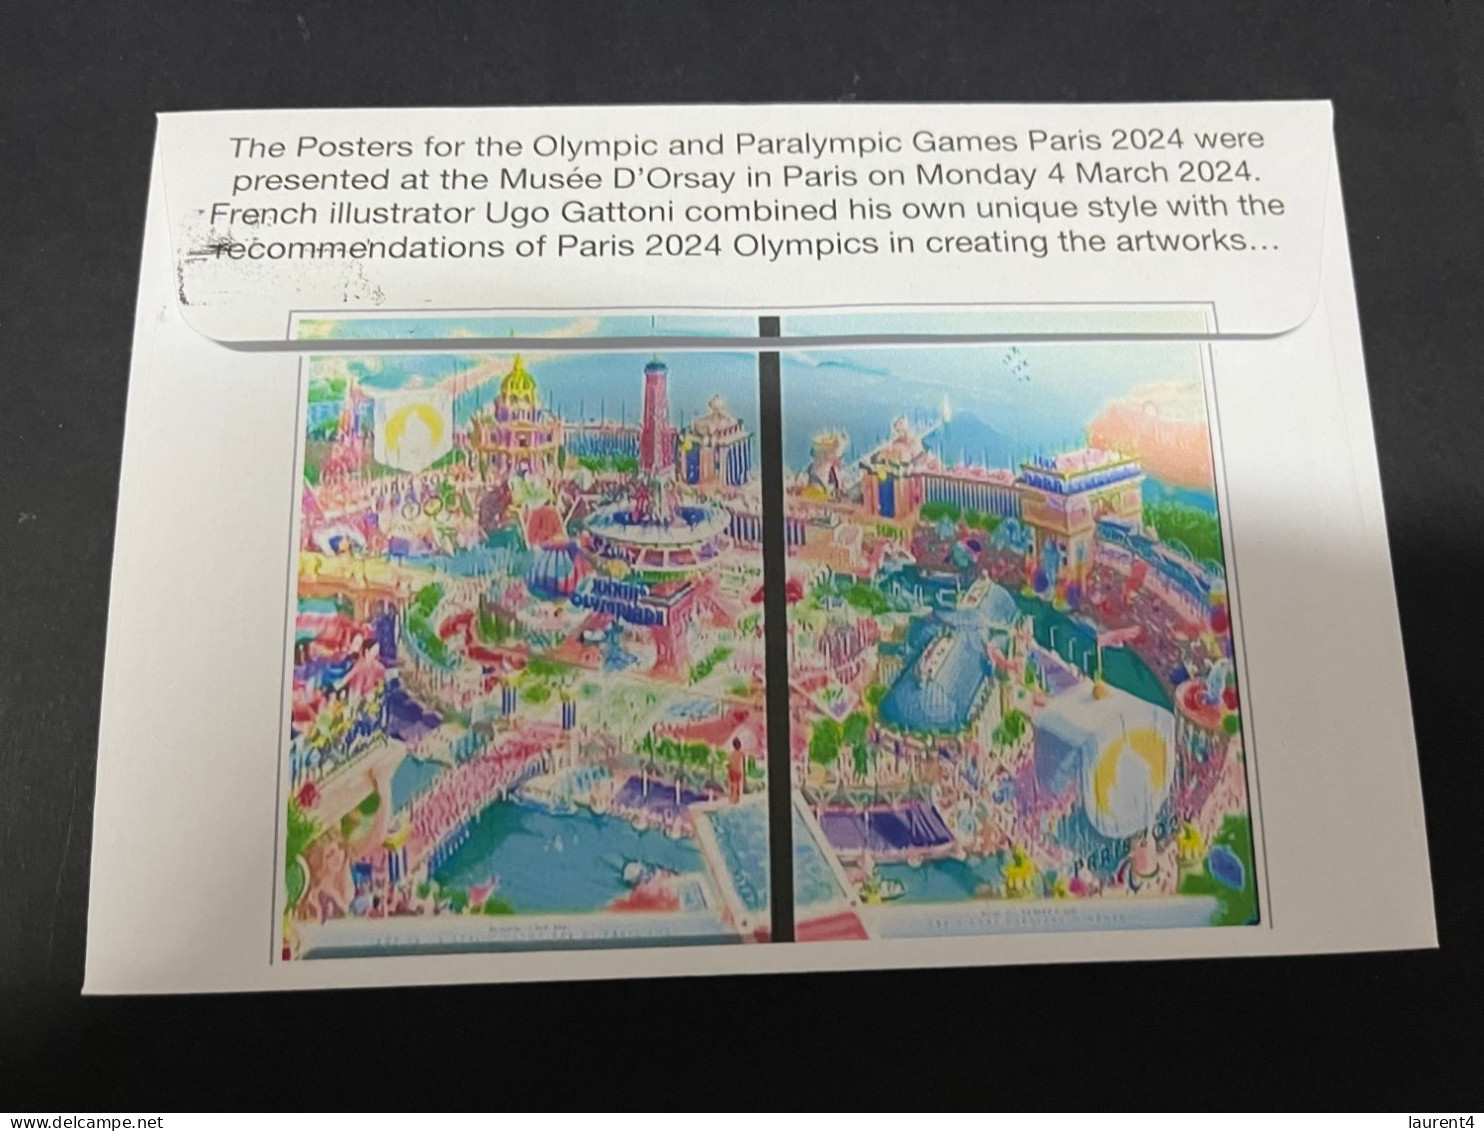 6-3-2024 (2 Y 17) Paris Olympic Games 2024 - 2 Olympic Games Posters Unveil At Musée D'Orsay (2 Covers) - Estate 2024 : Parigi